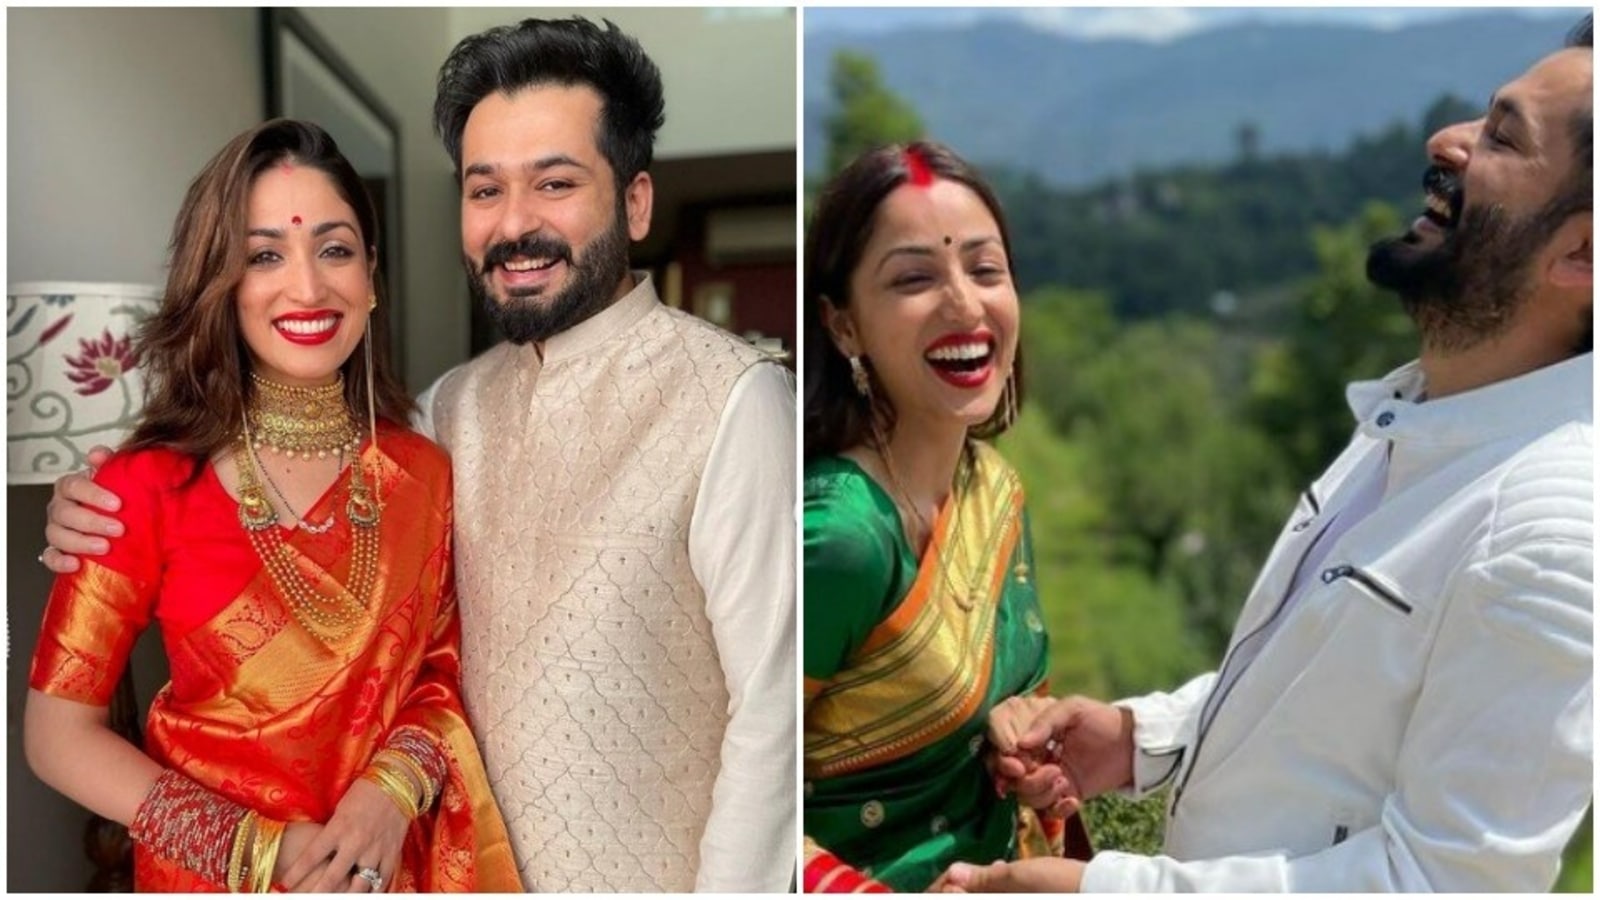 Yami Gautam says ‘forever’ as she shares unseen pictures with husband Aditya Dhar to wish him on his birthday